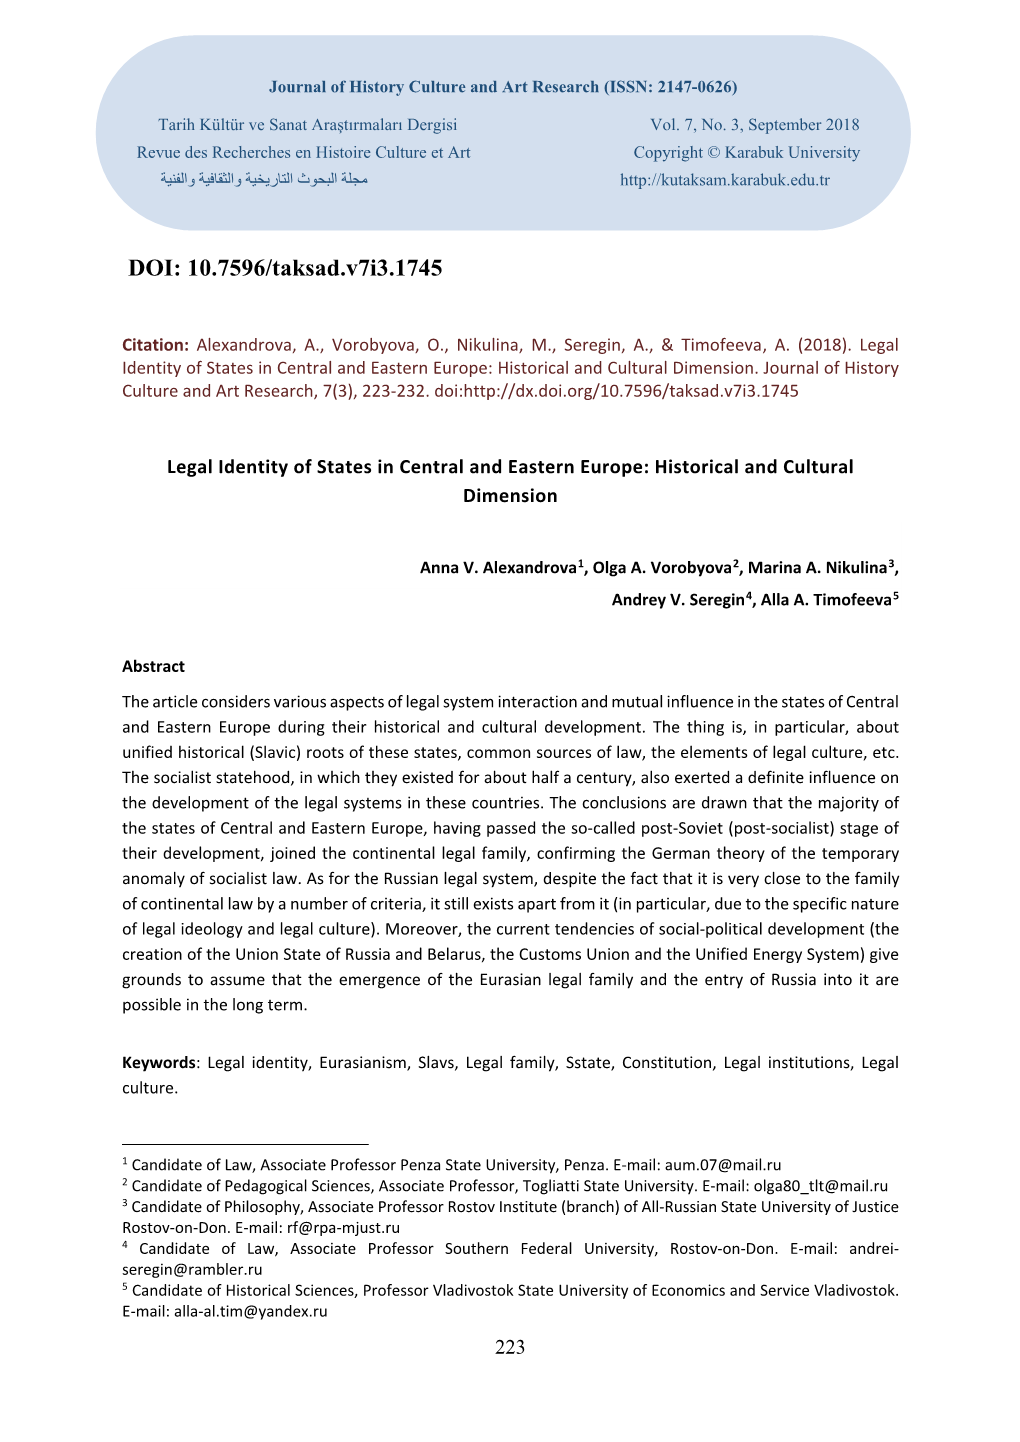 Legal Identity of States in Central and Eastern Europe: Historical and Cultural Dimension